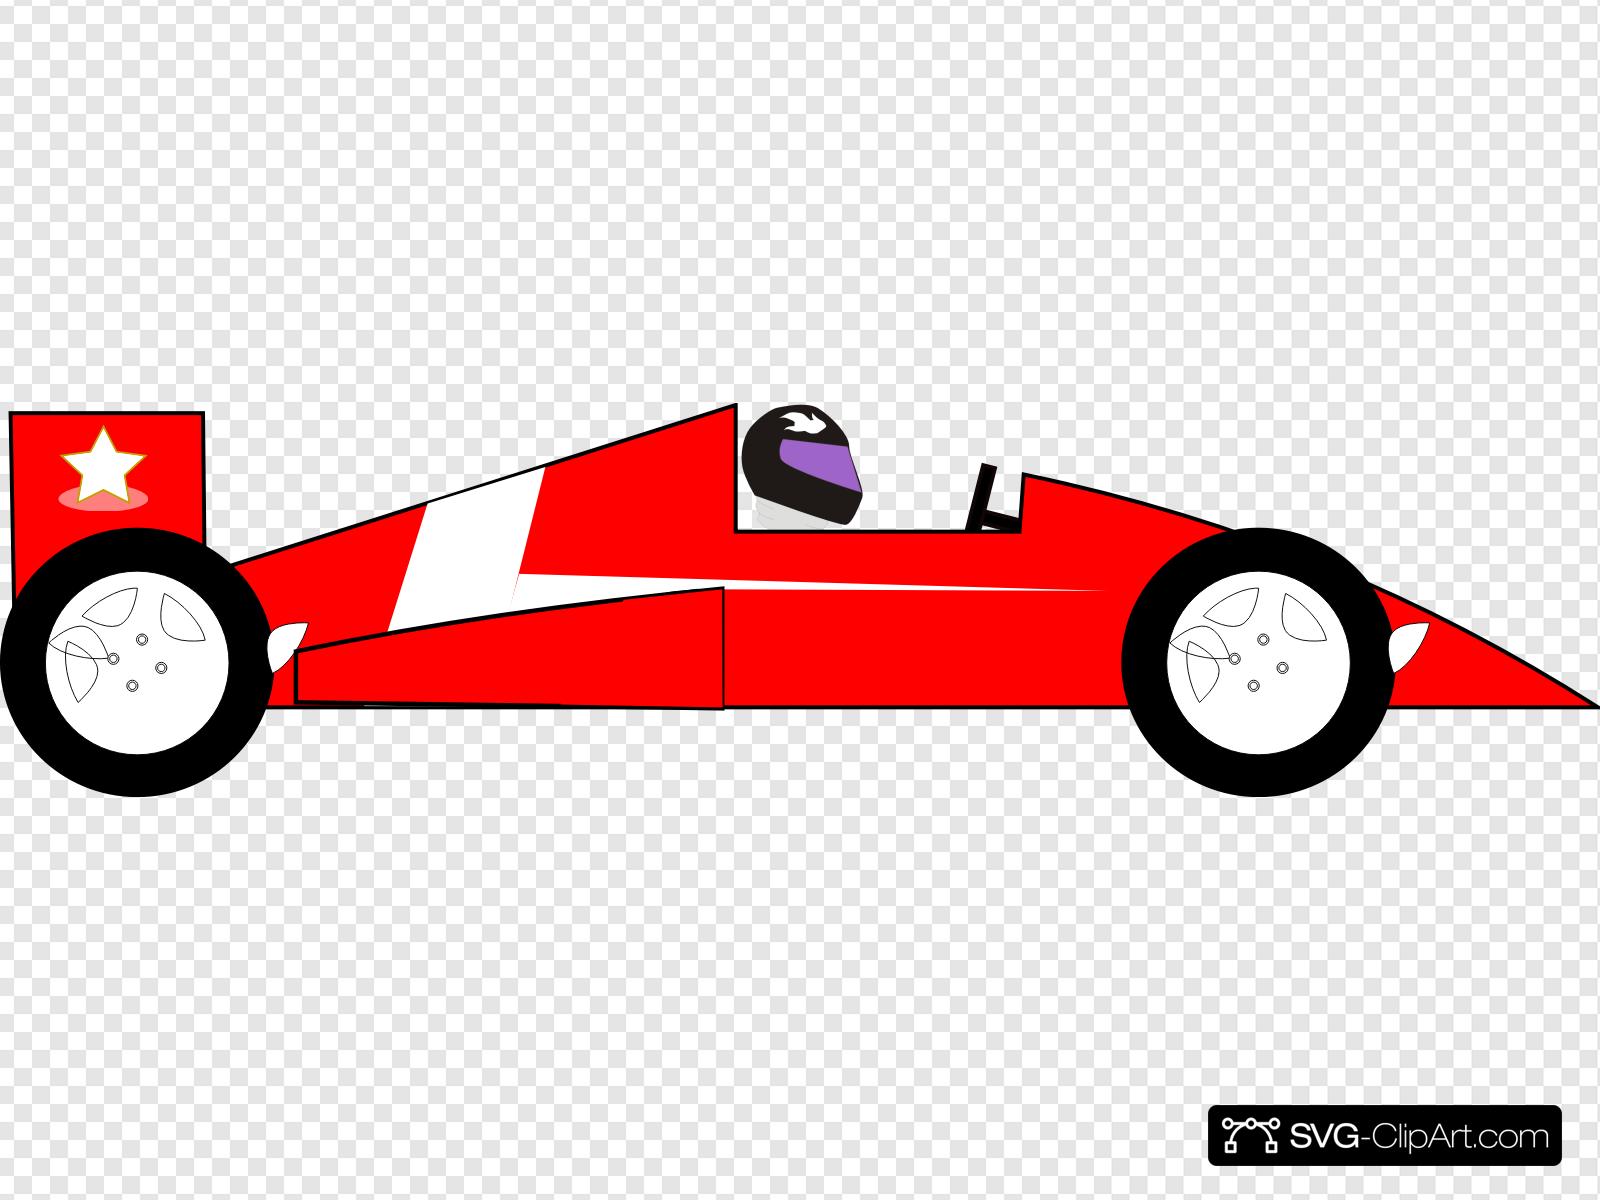 Red Racecar Clip art, Icon and SVG.